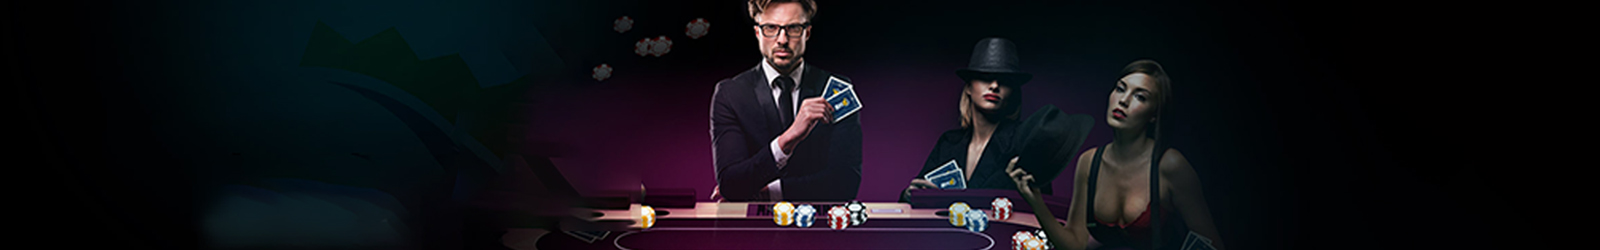 guy hand holding playing cards with diamond straight flush (10, J, Q, K, A) and betting chips